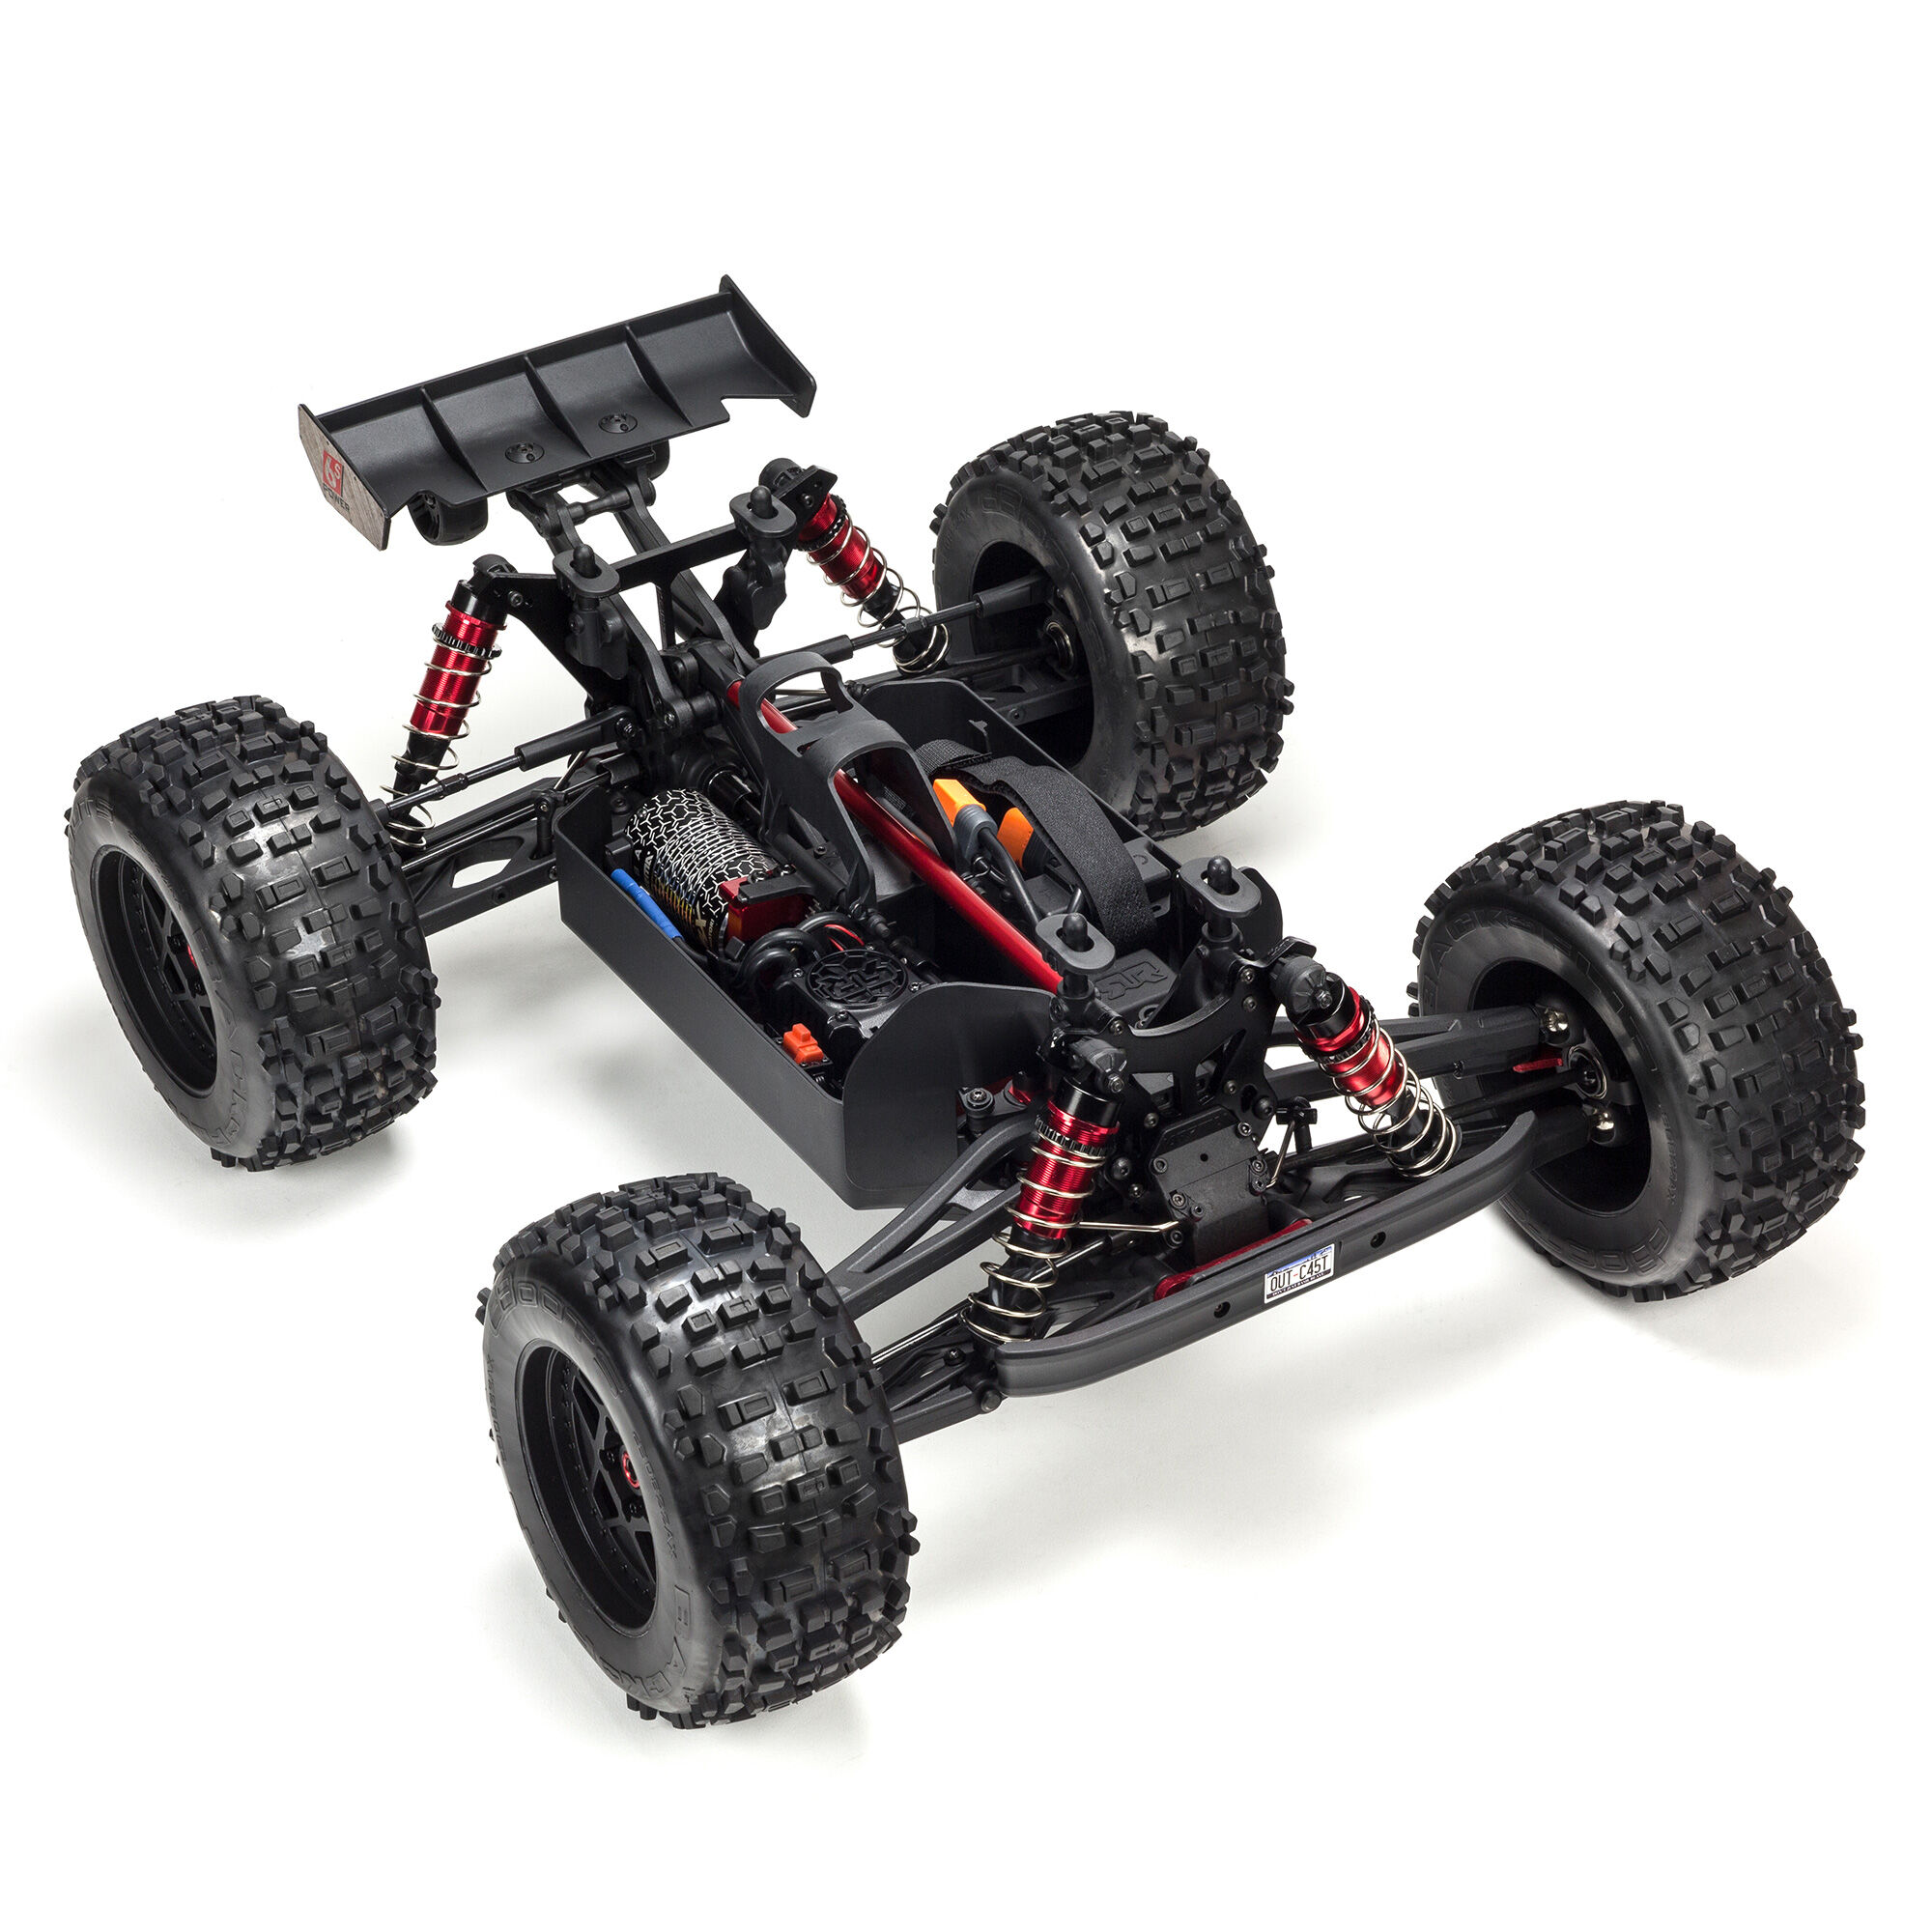 1/8 OUTCAST 6S BLX 4WD Brushless Stunt Truck with Spektrum RTR, Orange